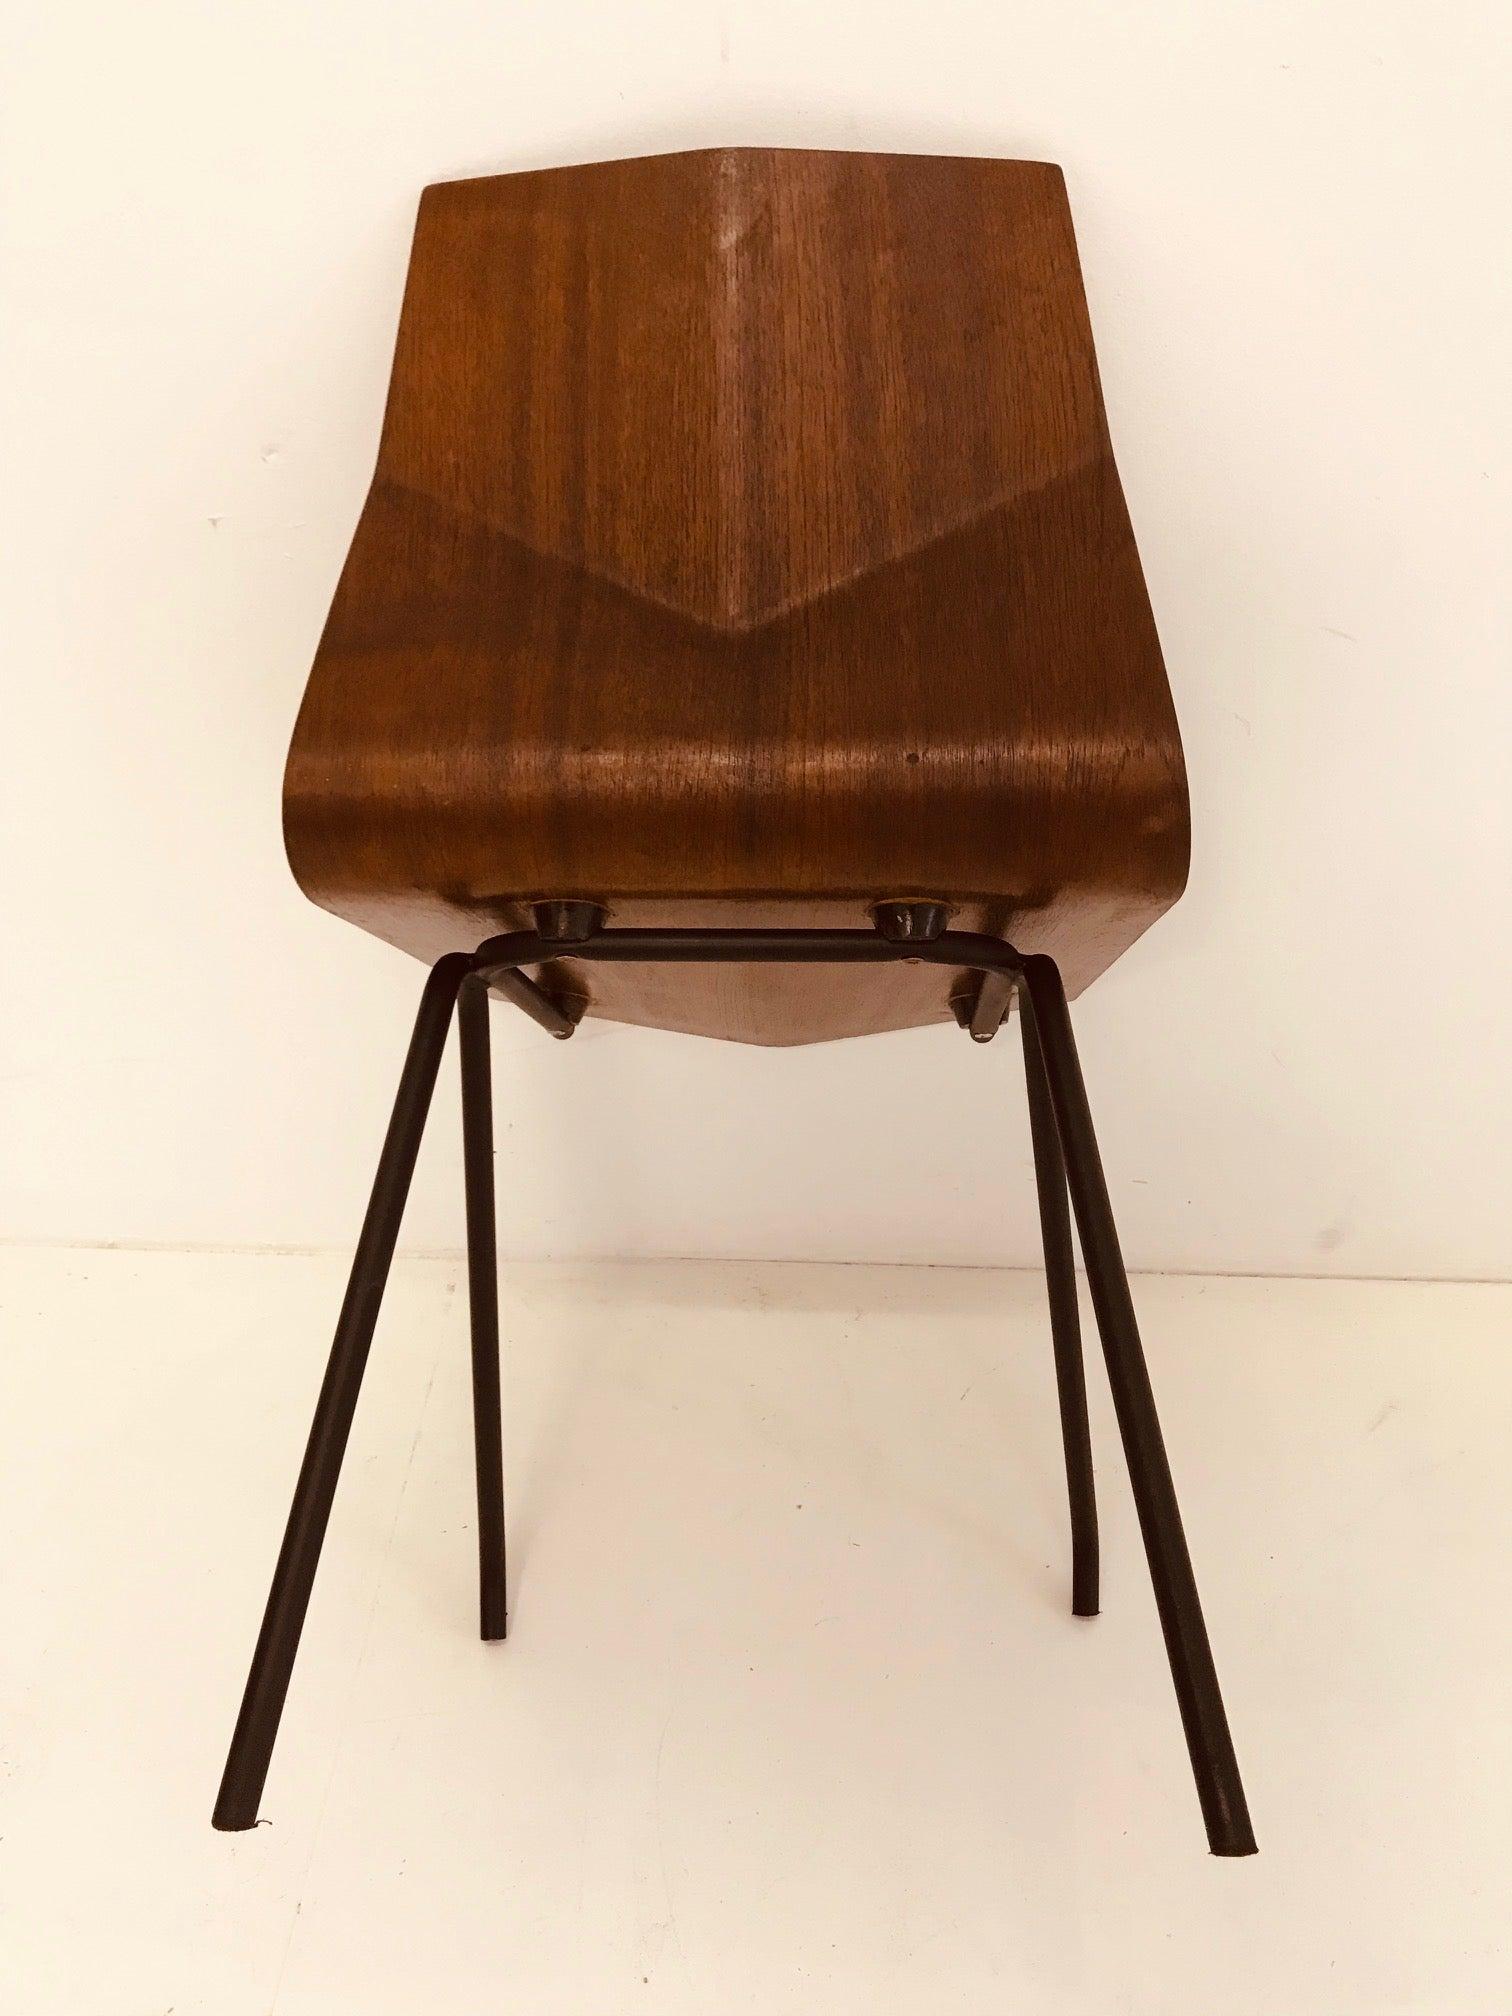 Plywood Daimond Chair by René-Jean Caillette, French Design, 1958